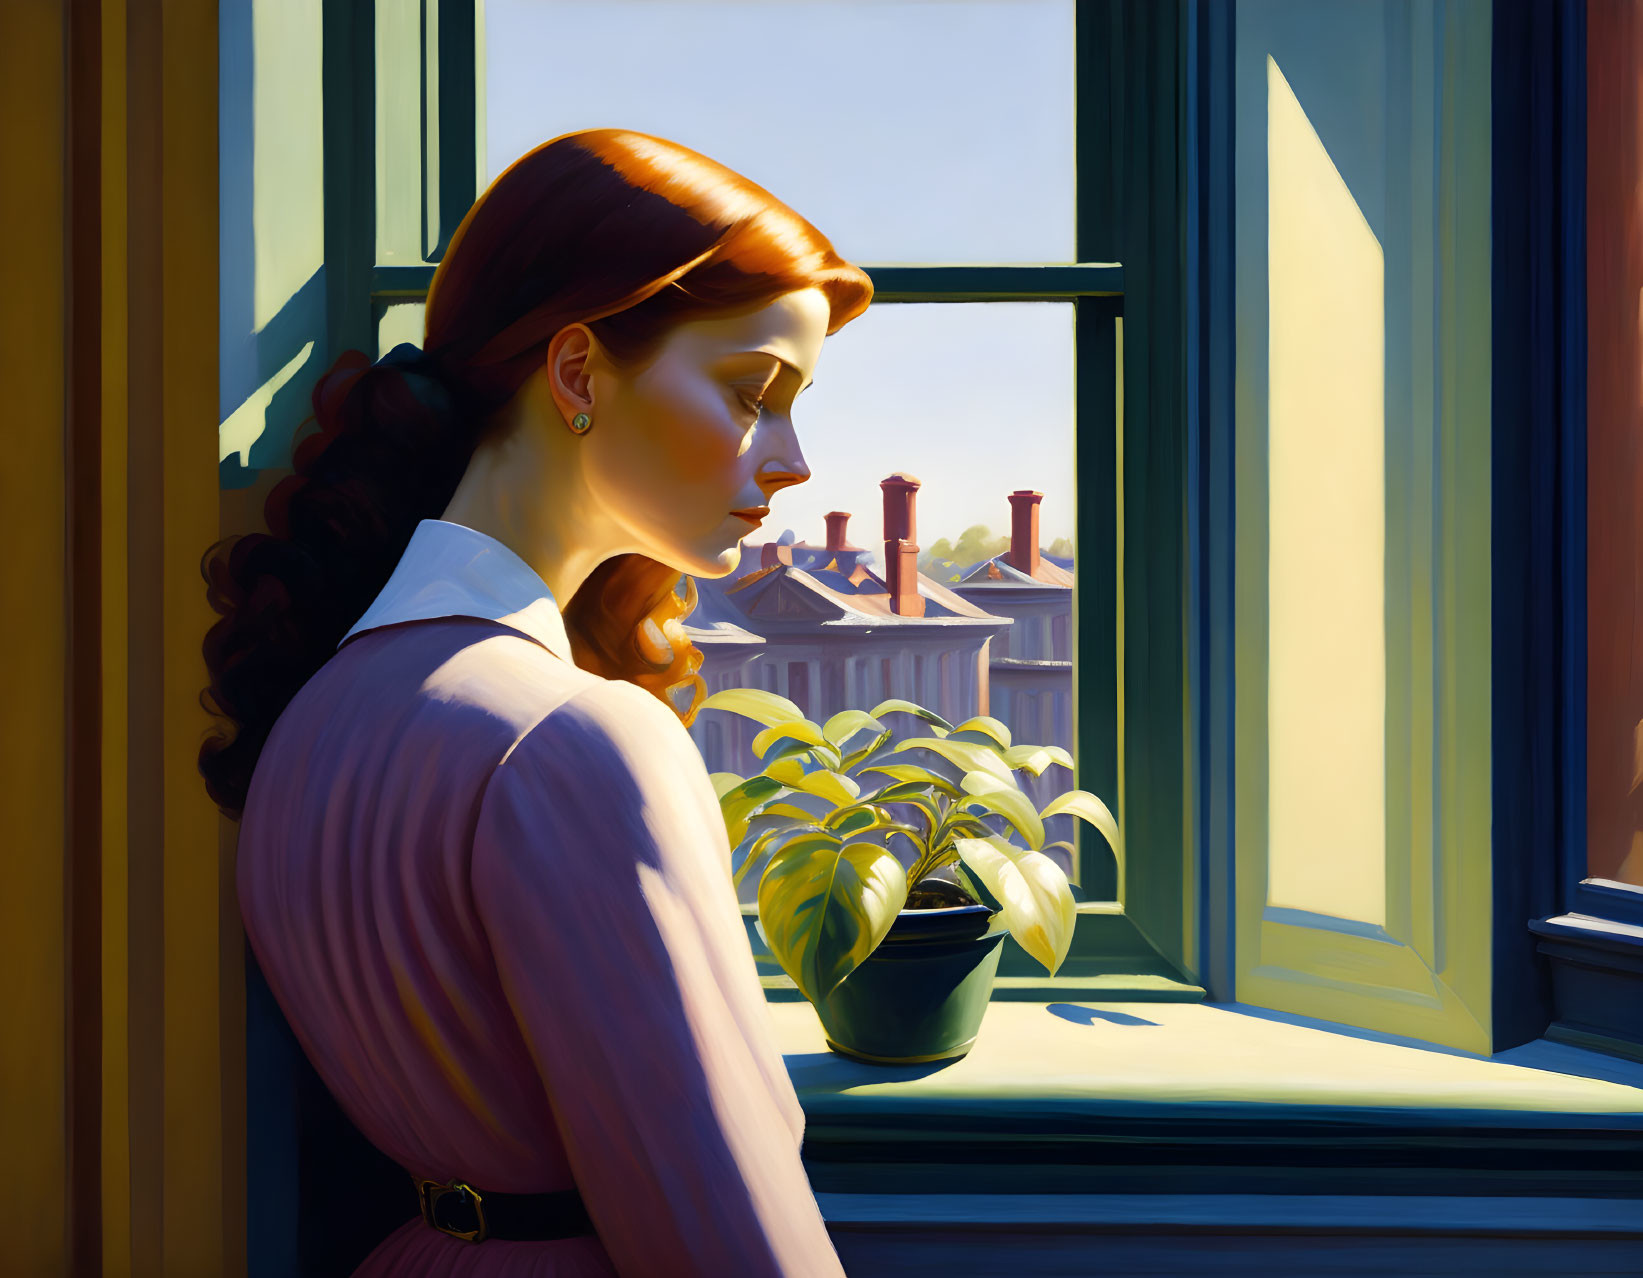 Auburn-haired woman gazes out window onto rooftops in sunlight